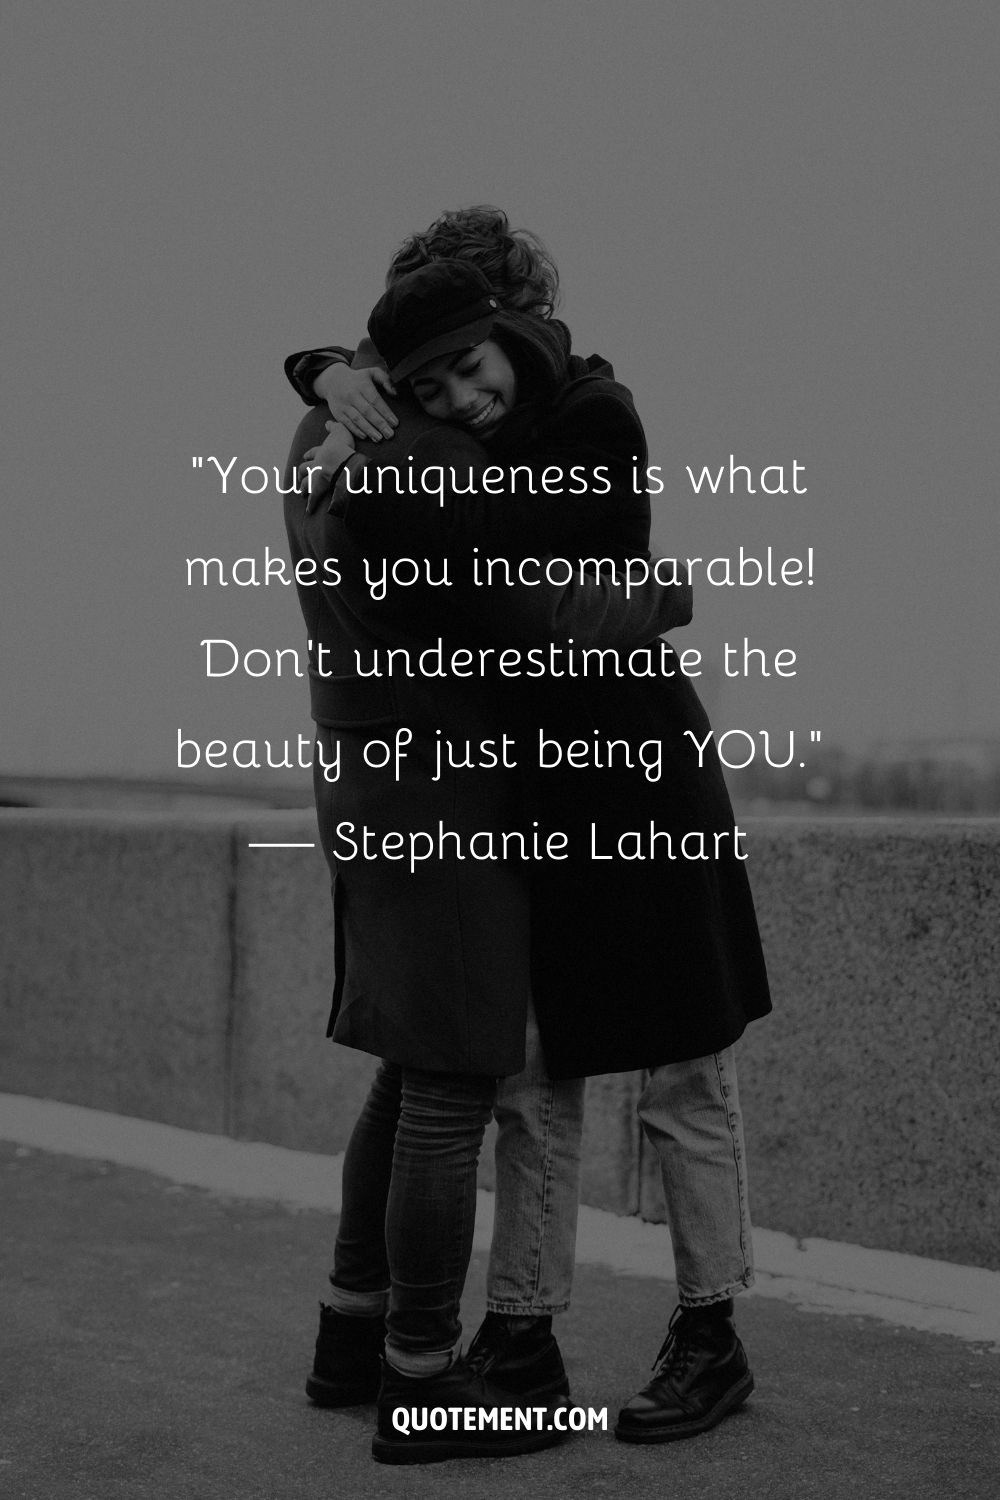 “Your uniqueness is what makes you incomparable! Don't underestimate the beauty of just being YOU.” — Stephanie Lahart